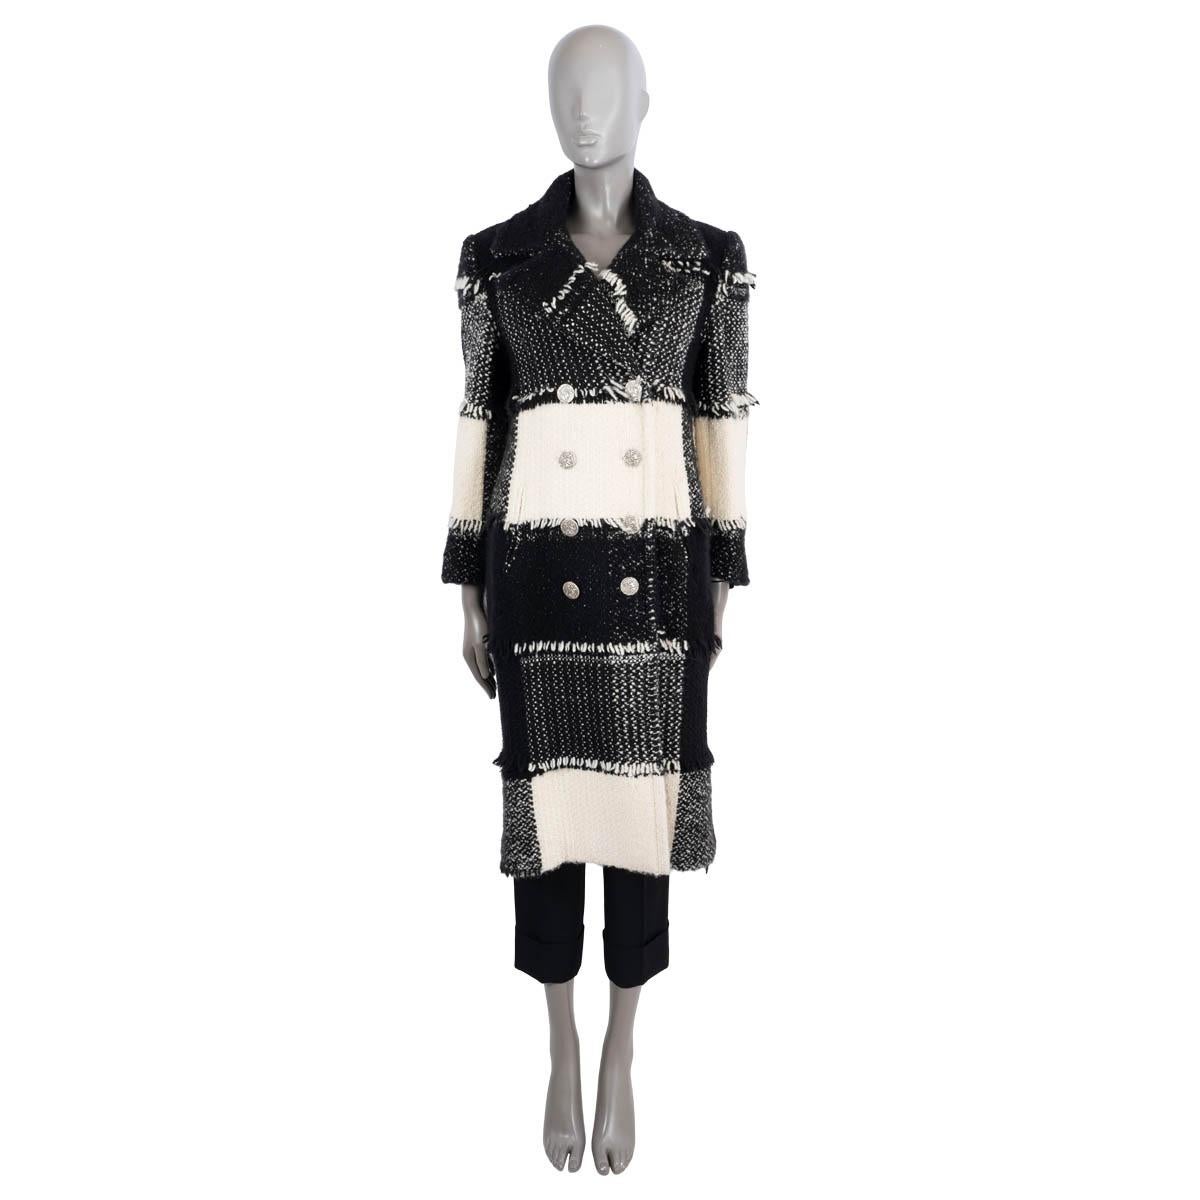 100% authentic Chanel double-breasted patchwork coat in ivory and black cashmere (67%), wool (25%), silk (5%) and polyamide (3%). Features a peak lapel and fringe trims. Closes with silver-tone antique coin buttons. Lined in silk (100%). Has been